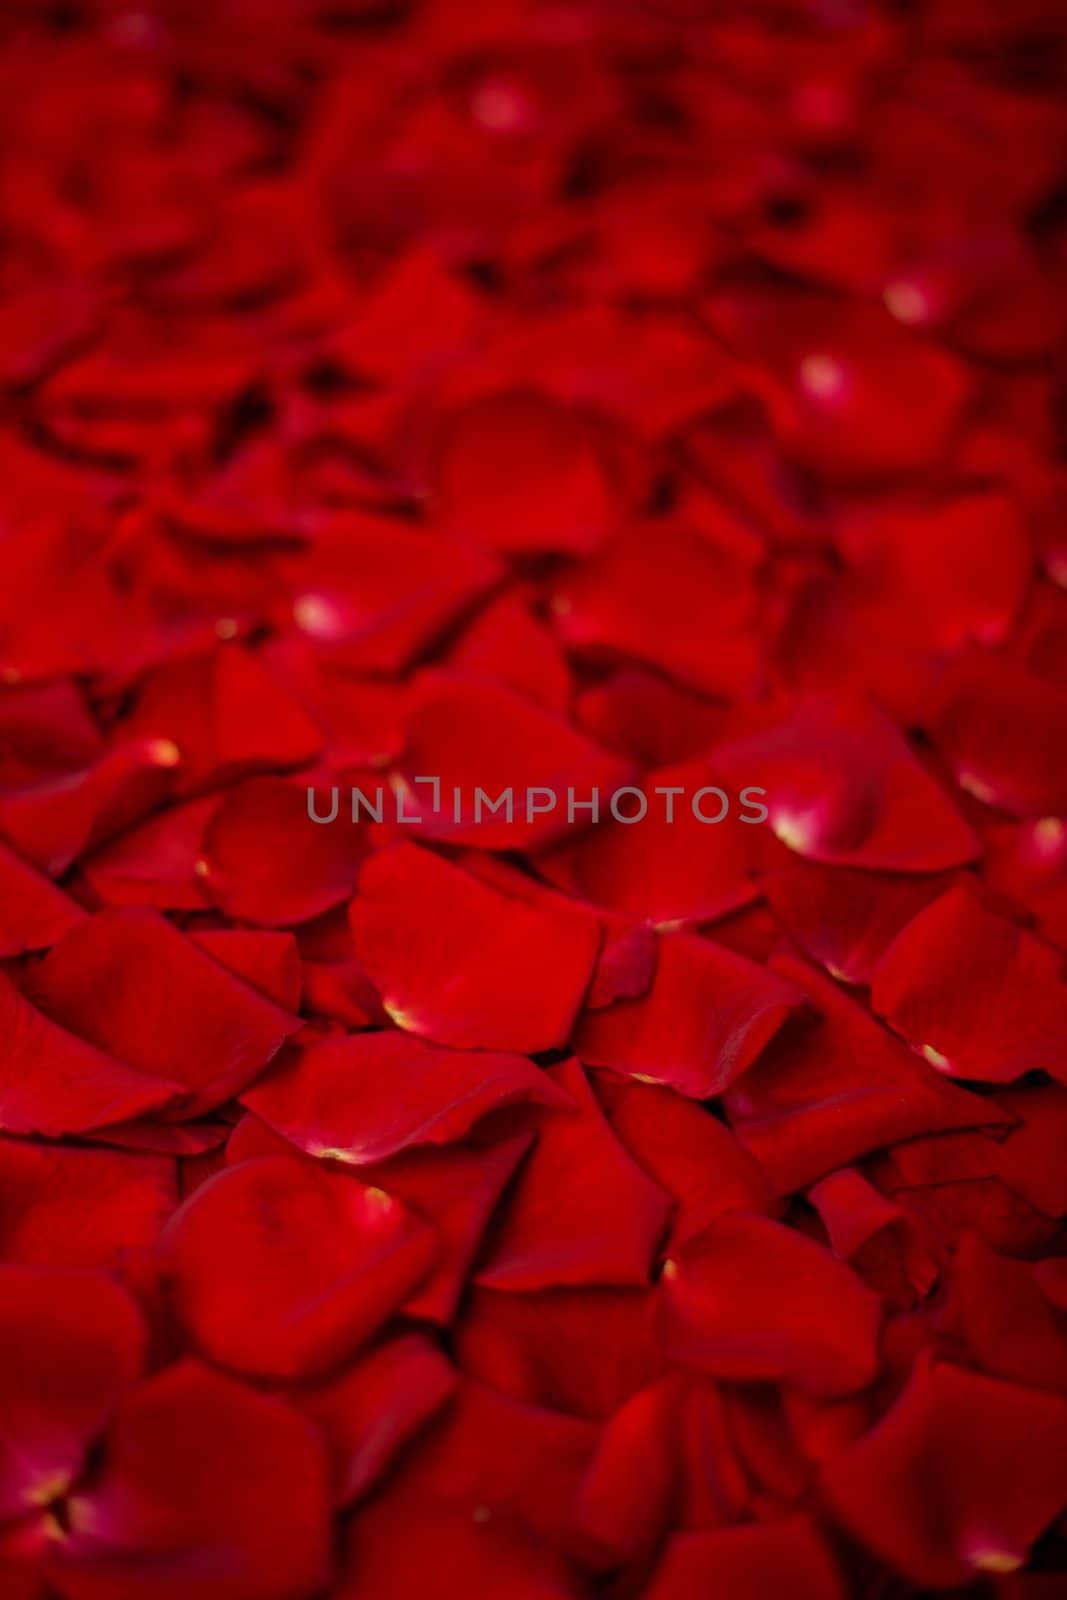 Background of red rose petals by bloodua